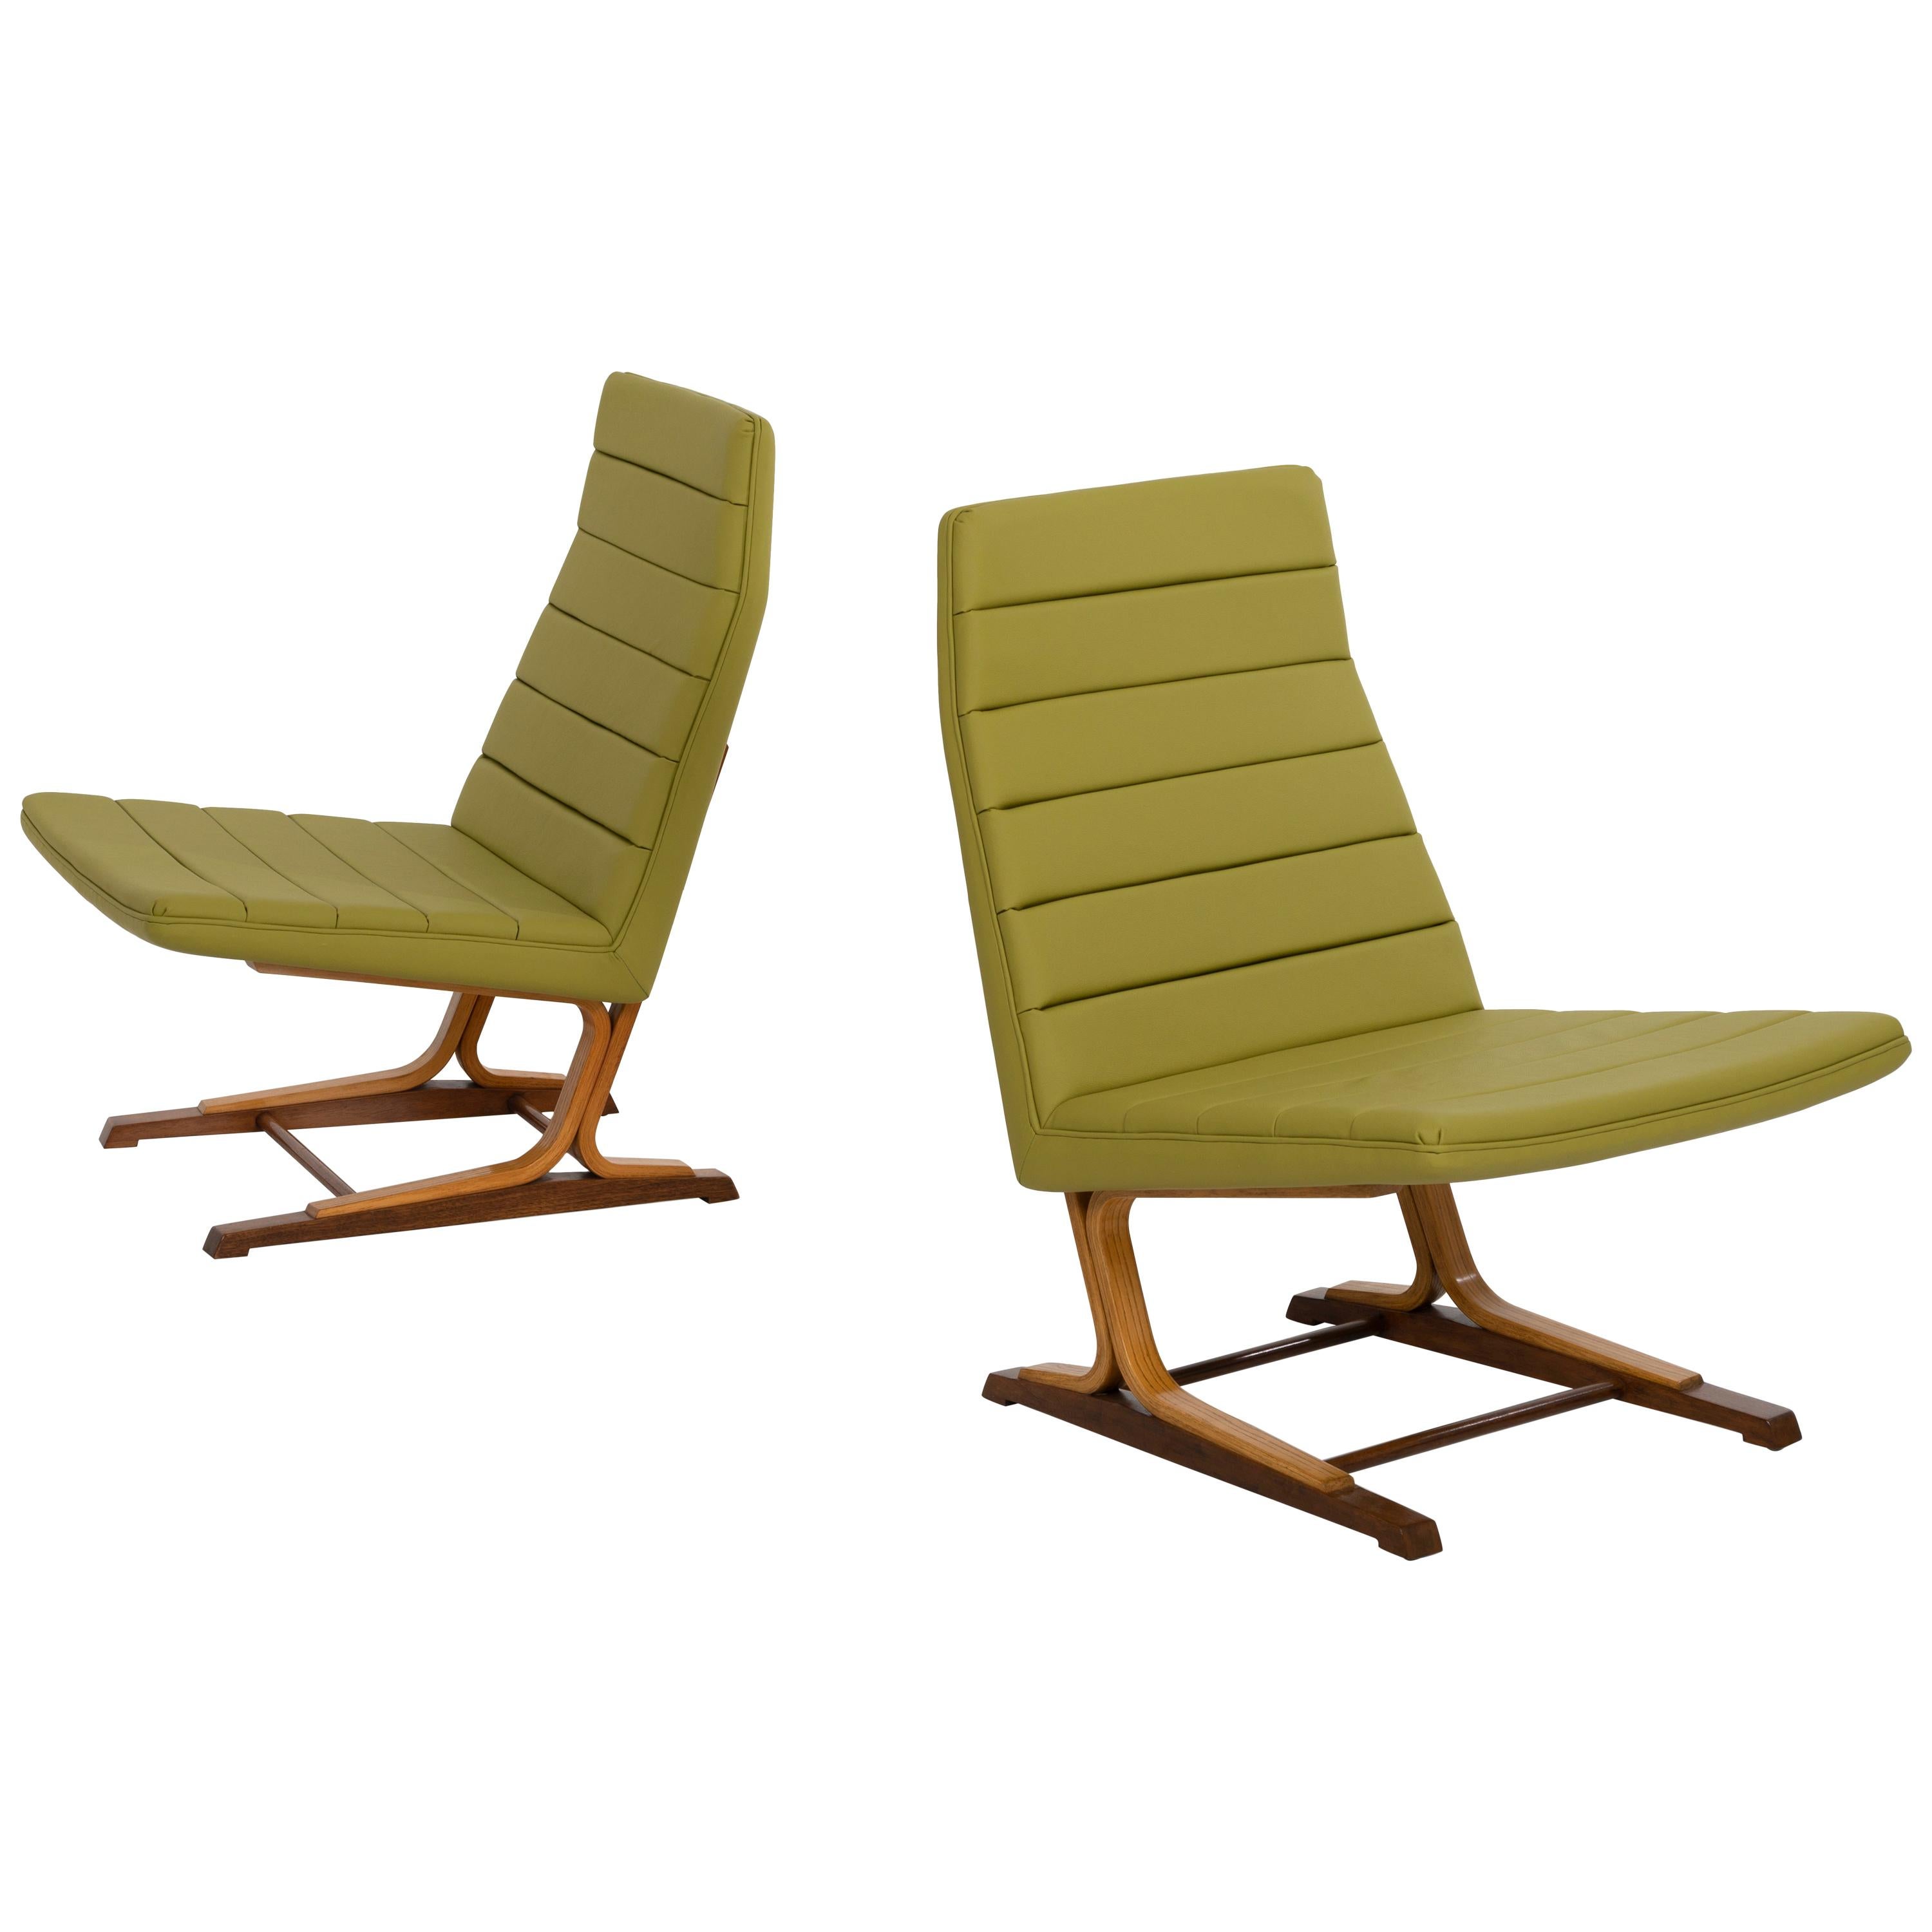 Roger Lee Sprunger for Dunbar Pair of Cantilever Lounge Chairs